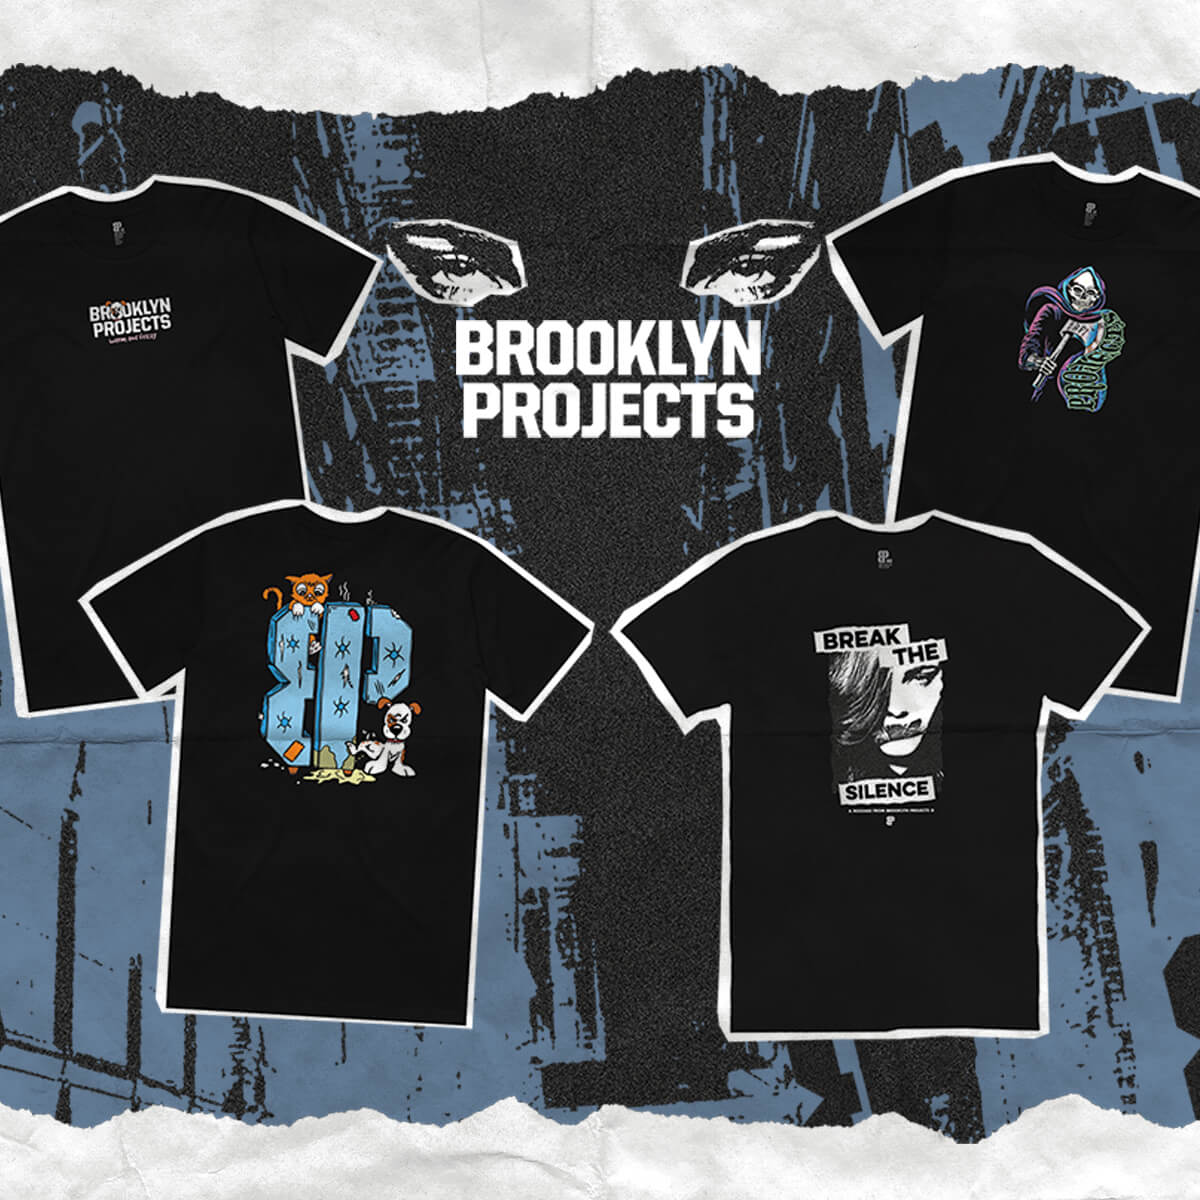 NEW ARRIVAL TEES FROM BROOKLYN PROJECTS & MORE - SHOP NEW TEES